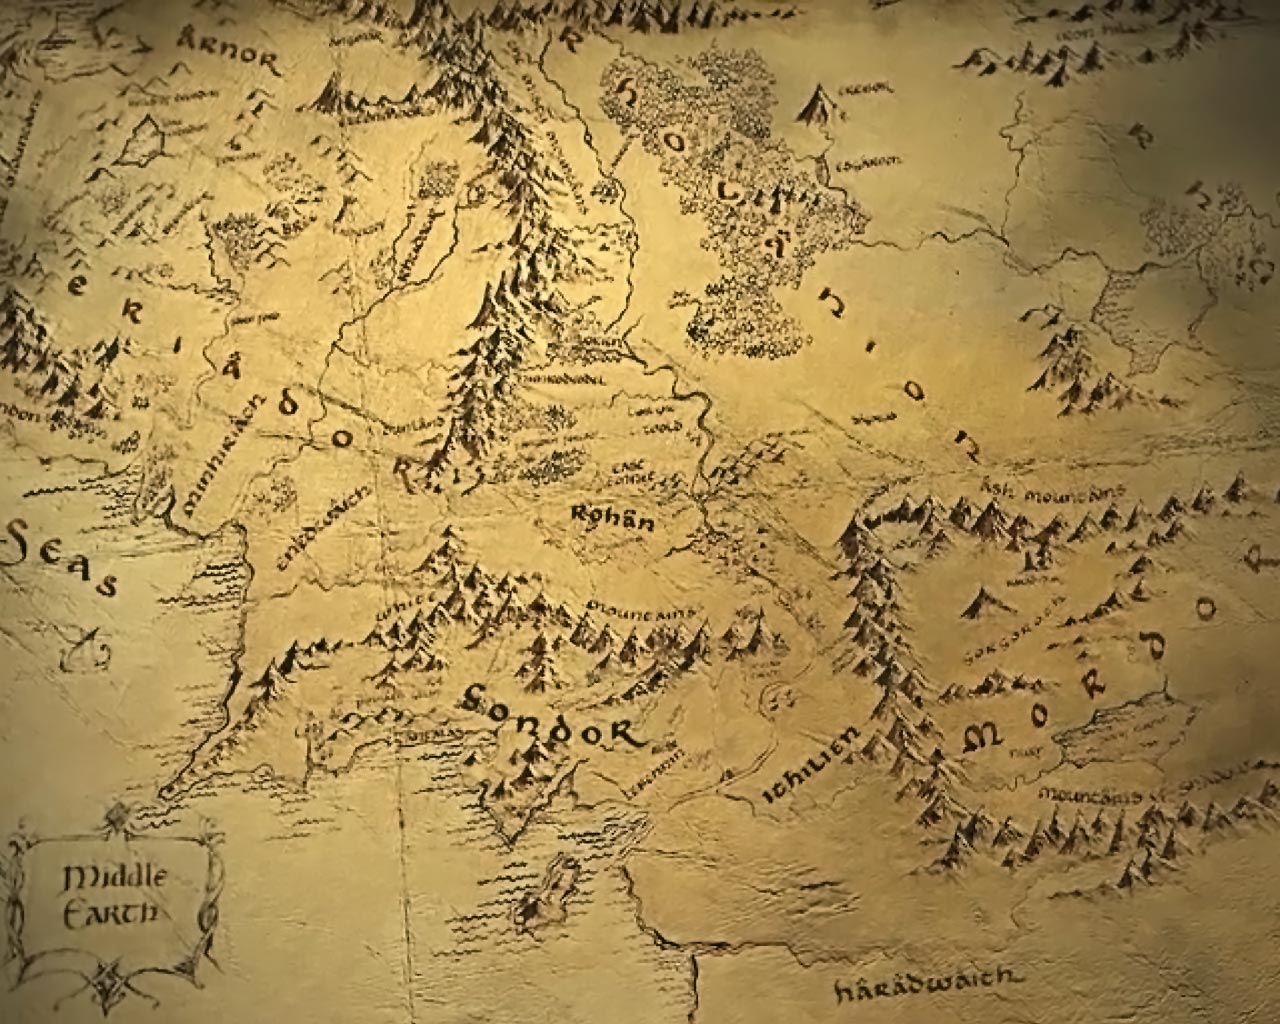 Middle Earth Map - HD Wallpaper 